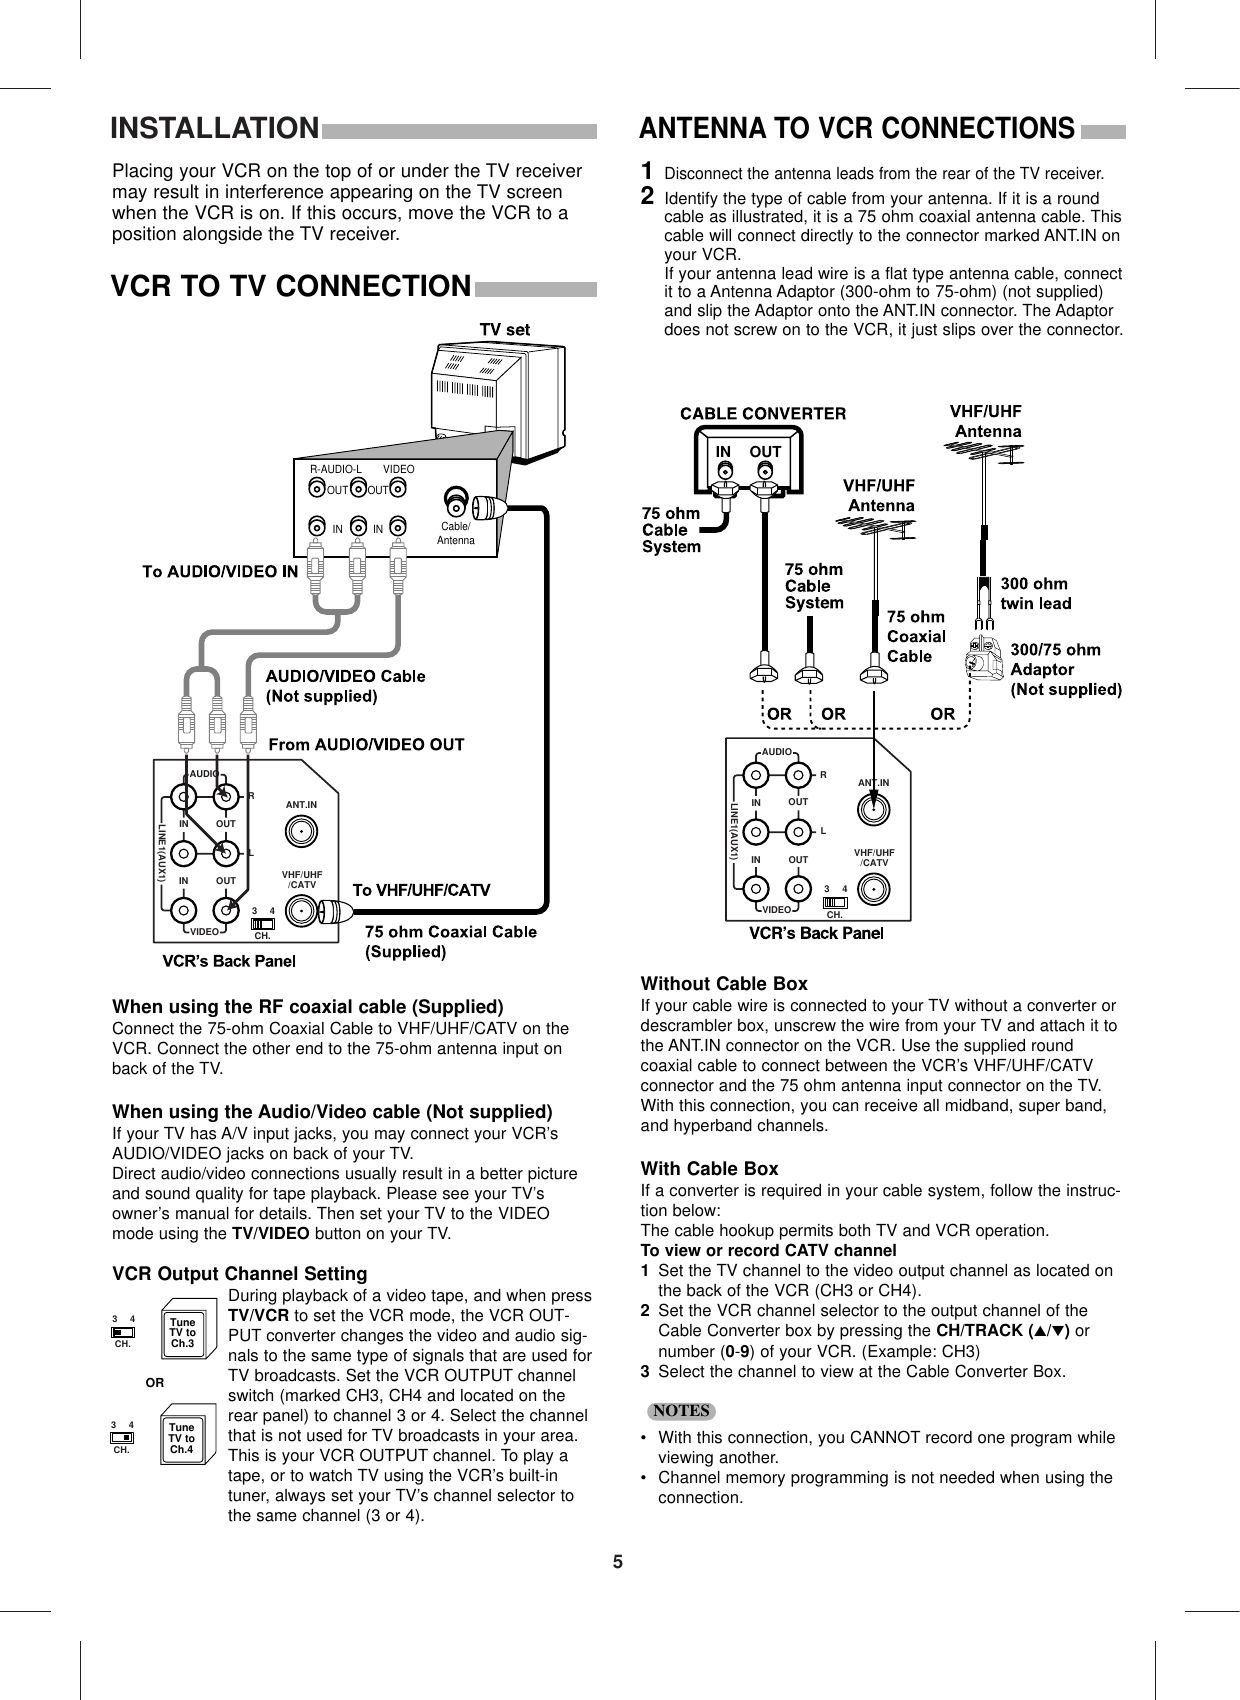 5INSTALLATIONPlacing your VCR on the top of or under the TV receivermay result in interference appearing on the TV screenwhen the VCR is on. If this occurs, move the VCR to aposition alongside the TV receiver.AUDIOLINE1(AUX1)RLININ OUTOUTANT.INVIDEO CH.34VHF/UHF/CATVCable/AntennaR-AUDIO-L VIDEOINOUTINOUTWhen using the RF coaxial cable (Supplied)Connect the 75-ohm Coaxial Cable to VHF/UHF/CATV on theVCR. Connect the other end to the 75-ohm antenna input onback of the TV.When using the Audio/Video cable (Not supplied)If your TV has A/V input jacks, you may connect your VCR’sAUDIO/VIDEO jacks on back of your TV.Direct audio/video connections usually result in a better pictureand sound quality for tape playback. Please see your TV’sowner’s manual for details. Then set your TV to the VIDEOmode using the TV/VIDEO button on your TV.VCR Output Channel SettingDuring playback of a video tape, and when pressTV/VCR to set the VCR mode, the VCR OUT-PUT converter changes the video and audio sig-nals to the same type of signals that are used forTV broadcasts. Set the VCR OUTPUT channelswitch (marked CH3, CH4 and located on therear panel) to channel 3 or 4. Select the channelthat is not used for TV broadcasts in your area.This is your VCR OUTPUT channel. To play atape, or to watch TV using the VCR’s built-intuner, always set your TV’s channel selector tothe same channel (3 or 4).VCR TO TV CONNECTIONANTENNA TO VCR CONNECTIONS AUDIOLINE1(AUX1)RLININ OUTOUTANT.INVIDEO CH.34VHF/UHF/CATVIN OUTWithout Cable BoxIf your cable wire is connected to your TV without a converter ordescrambler box, unscrew the wire from your TV and attach it tothe ANT.IN connector on the VCR. Use the supplied round coaxial cable to connect between the VCR’s VHF/UHF/CATVconnector and the 75 ohm antenna input connector on the TV.With this connection, you can receive all midband, super band,and hyperband channels.With Cable BoxIf a converter is required in your cable system, follow the instruc-tion below:The cable hookup permits both TV and VCR operation. To view or record CATV channel1Set the TV channel to the video output channel as located onthe back of the VCR (CH3 or CH4).2Set the VCR channel selector to the output channel of theCable Converter box by pressing the CH/TRACK (▲/▼)ornumber (0-9) of your VCR. (Example: CH3)3Select the channel to view at the Cable Converter Box.•With this connection, you CANNOT record one program whileviewing another.•Channel memory programming is not needed when using theconnection.NOTES1Disconnect the antenna leads from the rear of the TV receiver.2Identify the type of cable from your antenna. If it is a roundcable as illustrated, it is a 75 ohm coaxial antenna cable. Thiscable will connect directly to the connector marked ANT.IN onyour VCR.If your antenna lead wire is a flat type antenna cable, connectit to a Antenna Adaptor (300-ohm to 75-ohm) (not supplied)and slip the Adaptor onto the ANT.IN connector. The Adaptordoes not screw on to the VCR, it just slips over the connector.TuneTV toCh.3TuneTV toCh.4ORCH.34CH.34